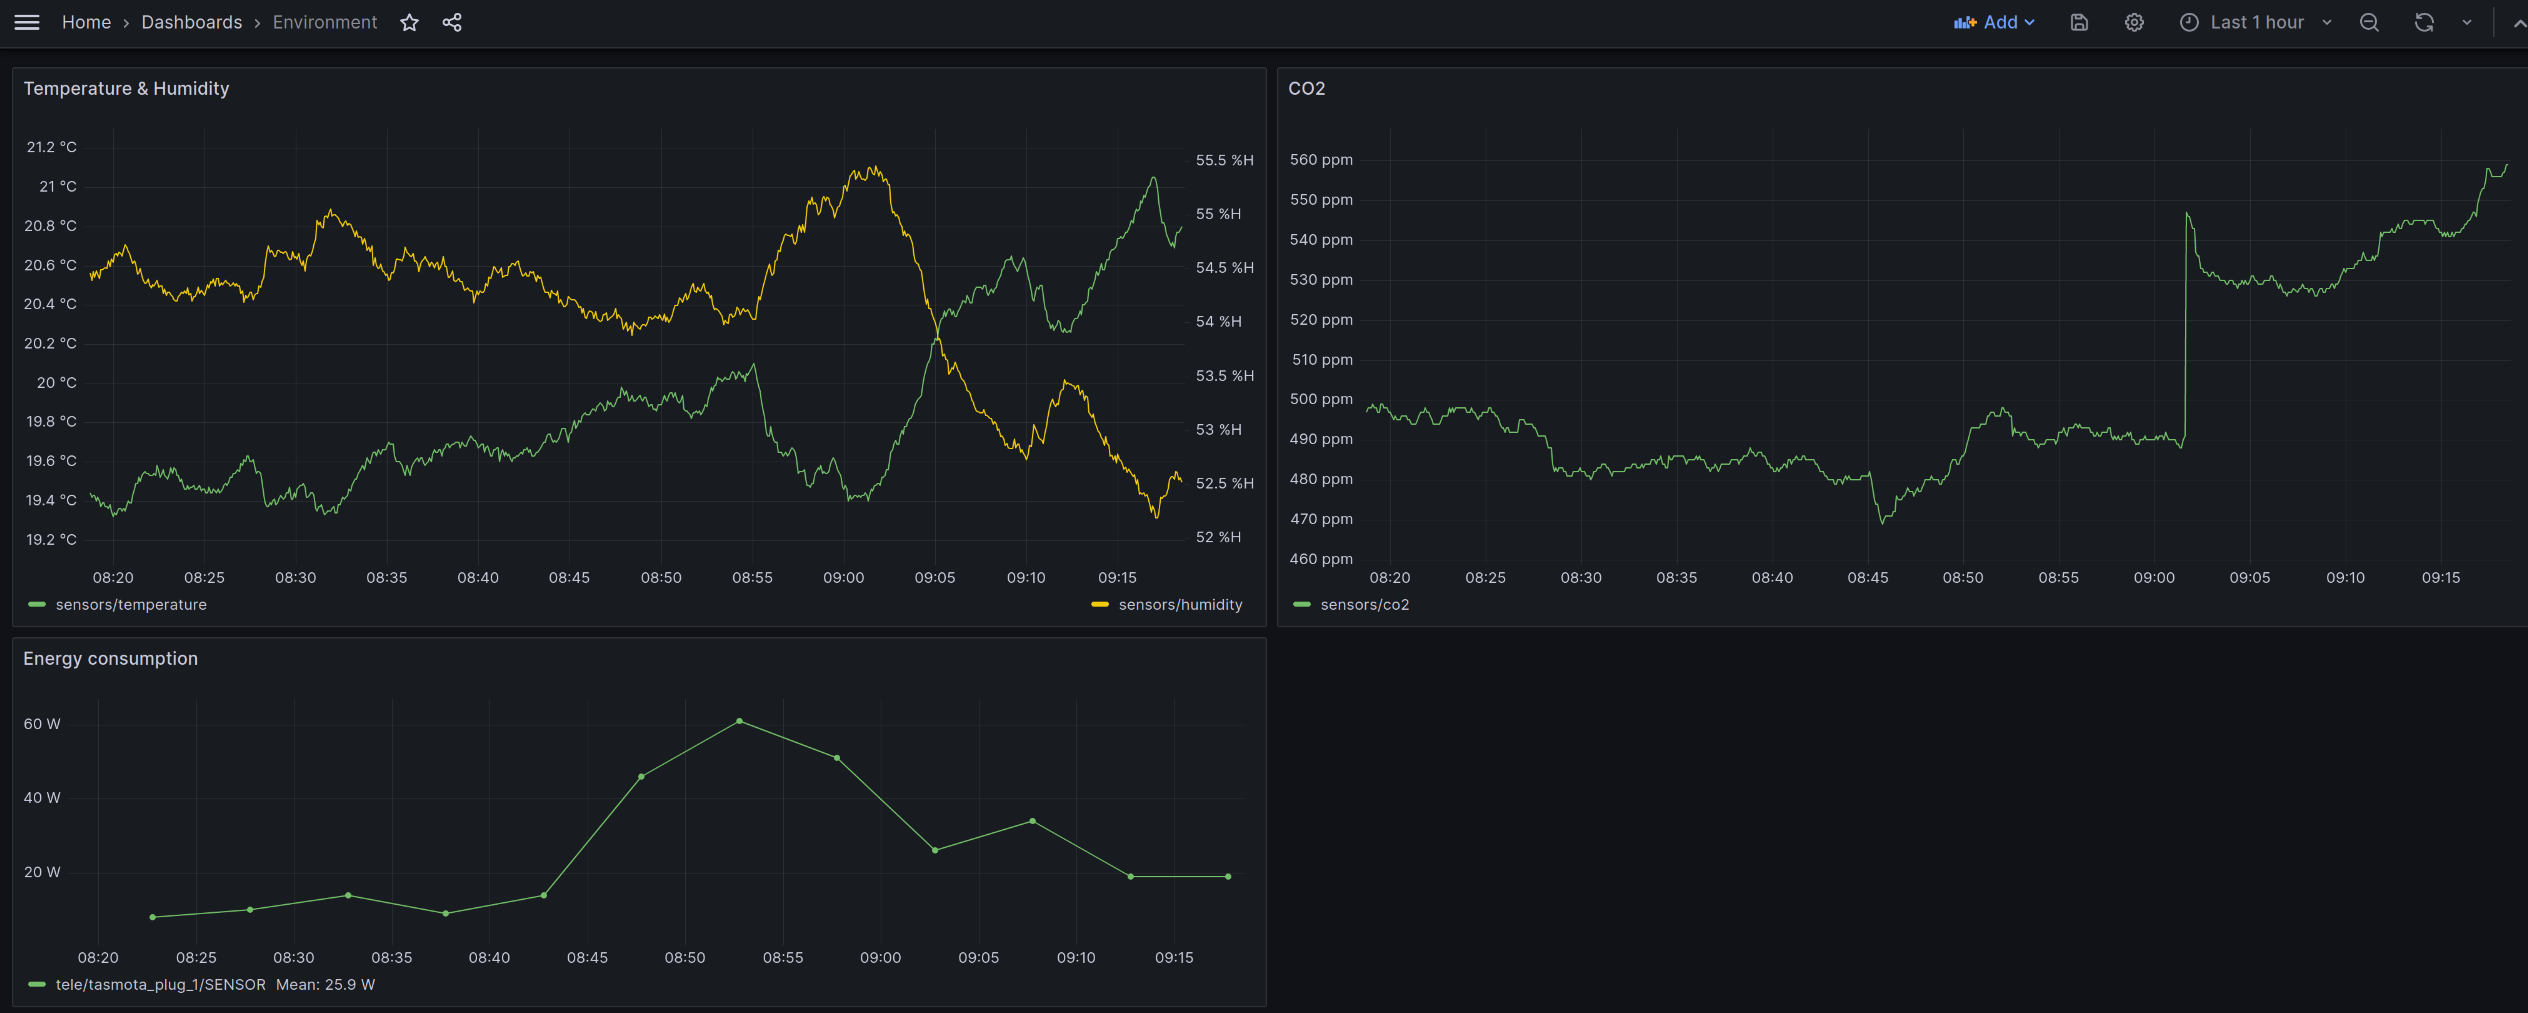 A screenshot of a grafana dashboard. It shows one panel with temperature and humindity values over an hour, one panel showing CO2 data and one showing energy consumption